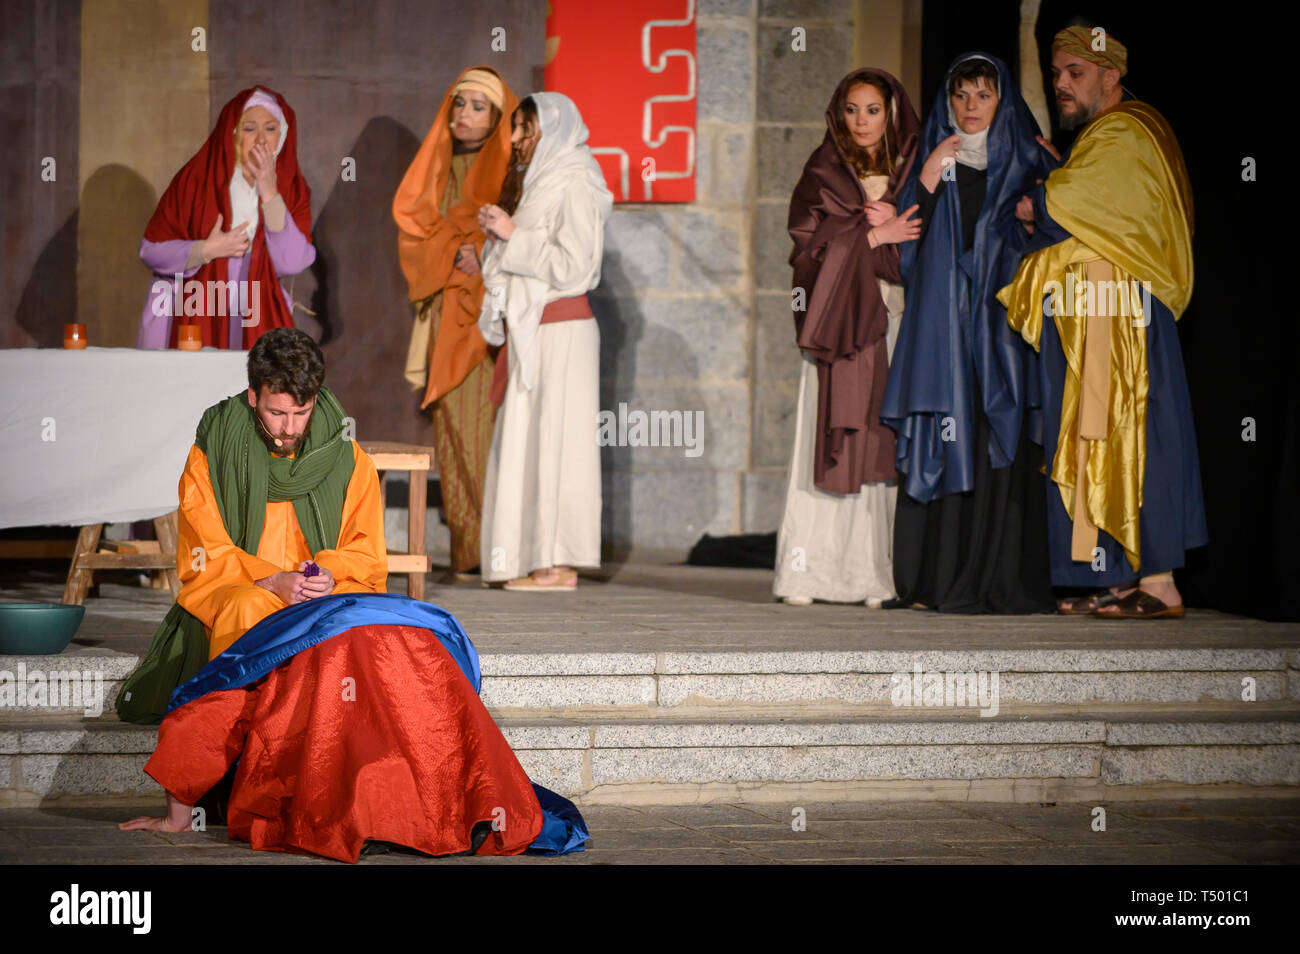 Brunete, Spain - April 11, 2019: Popular play of The Passion of Christ in the Plaza Mayor of the town. Jesus washes and kisses the feet of Judas. Stock Photo